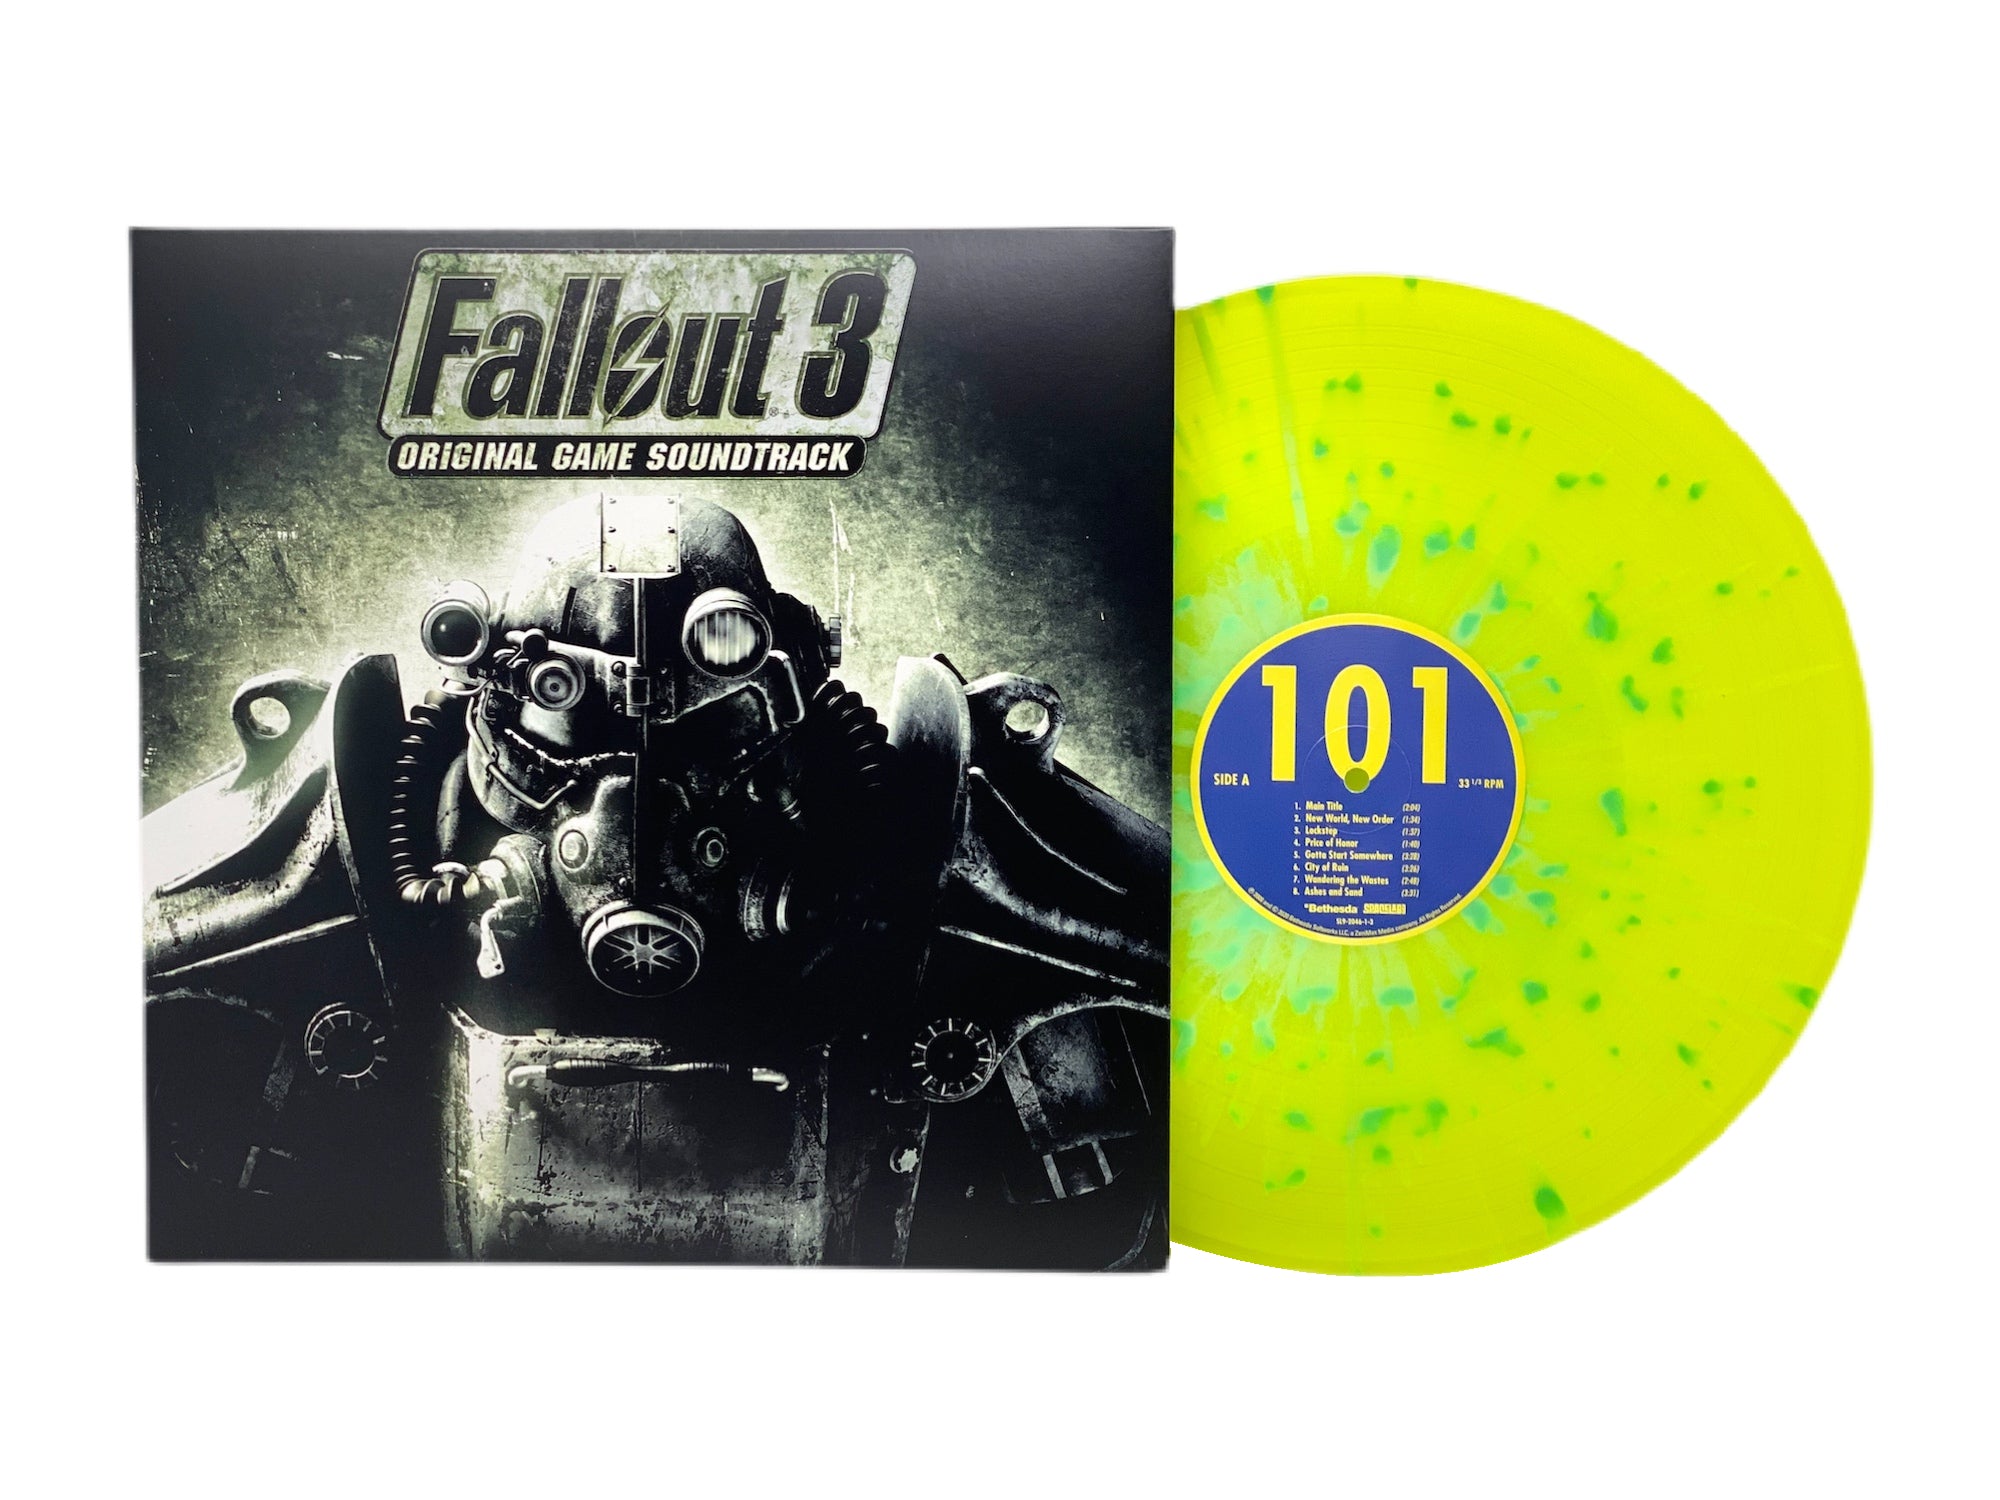  FALLOUT® 3: ORIGINAL GAME SOUNDTRACK LP [*ISOTOPE-239